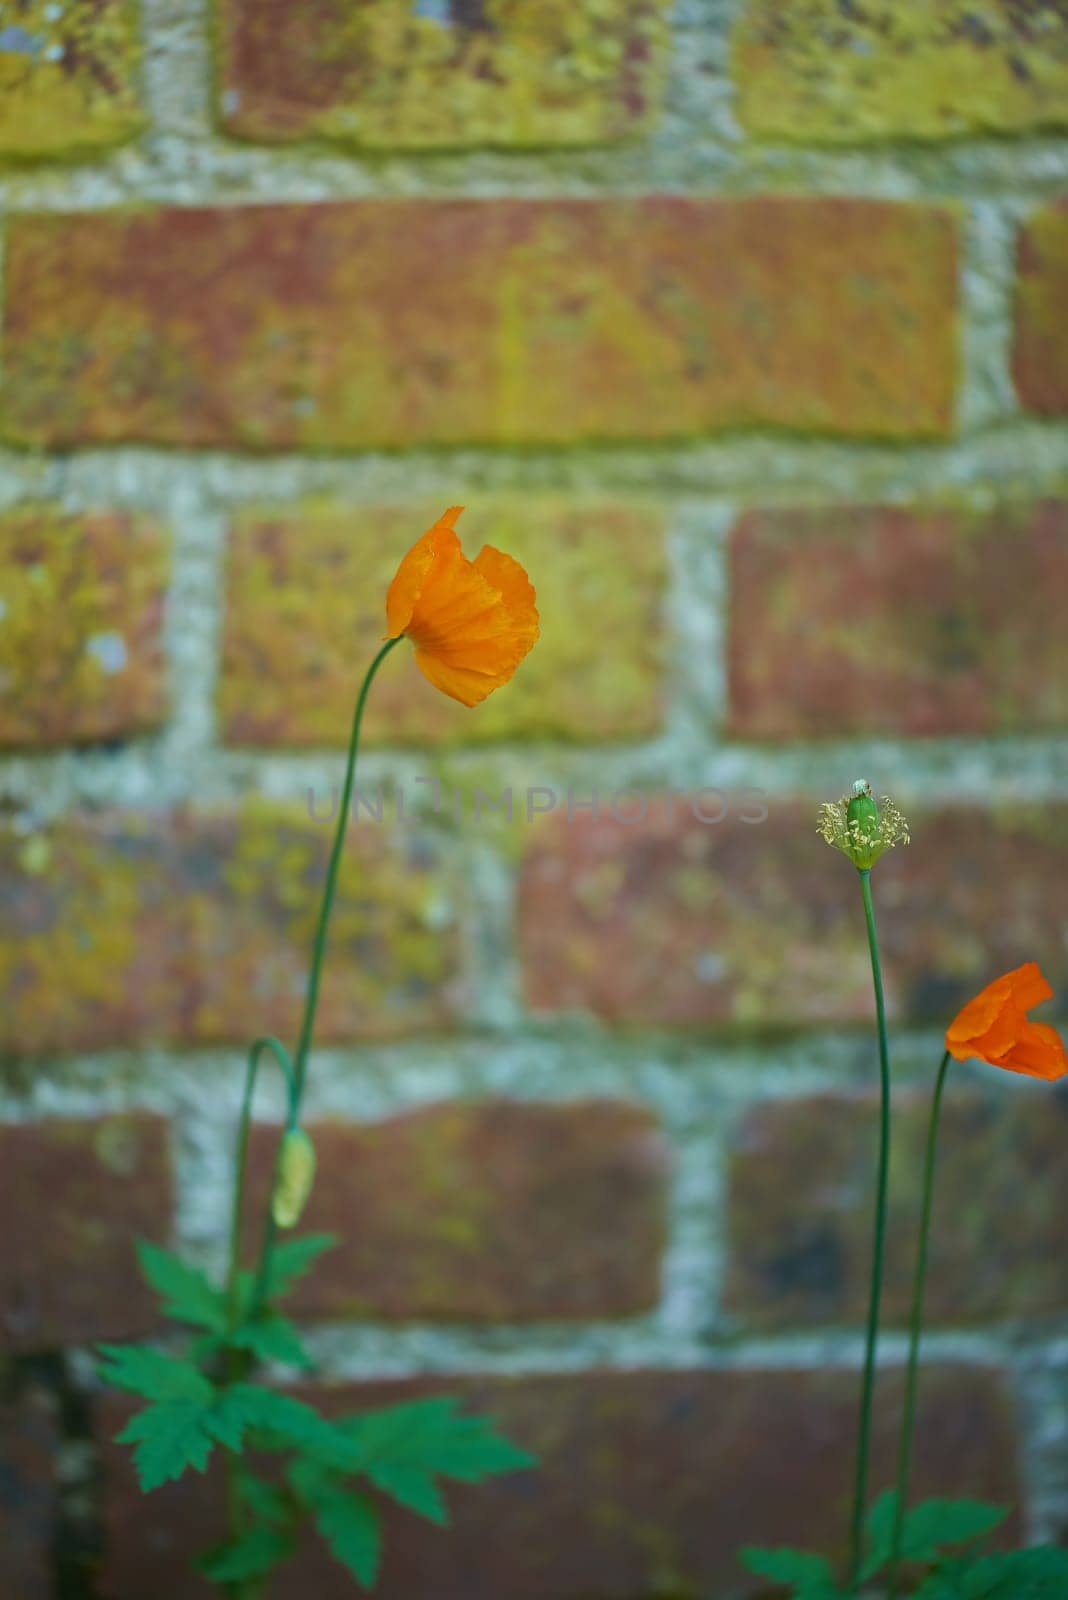 Nature, poppy flower and environment with brick by wall for natural development, growth and sustainable for eco friendly. Ecological, plant and garden from papaver crocreum gardening for decoration.